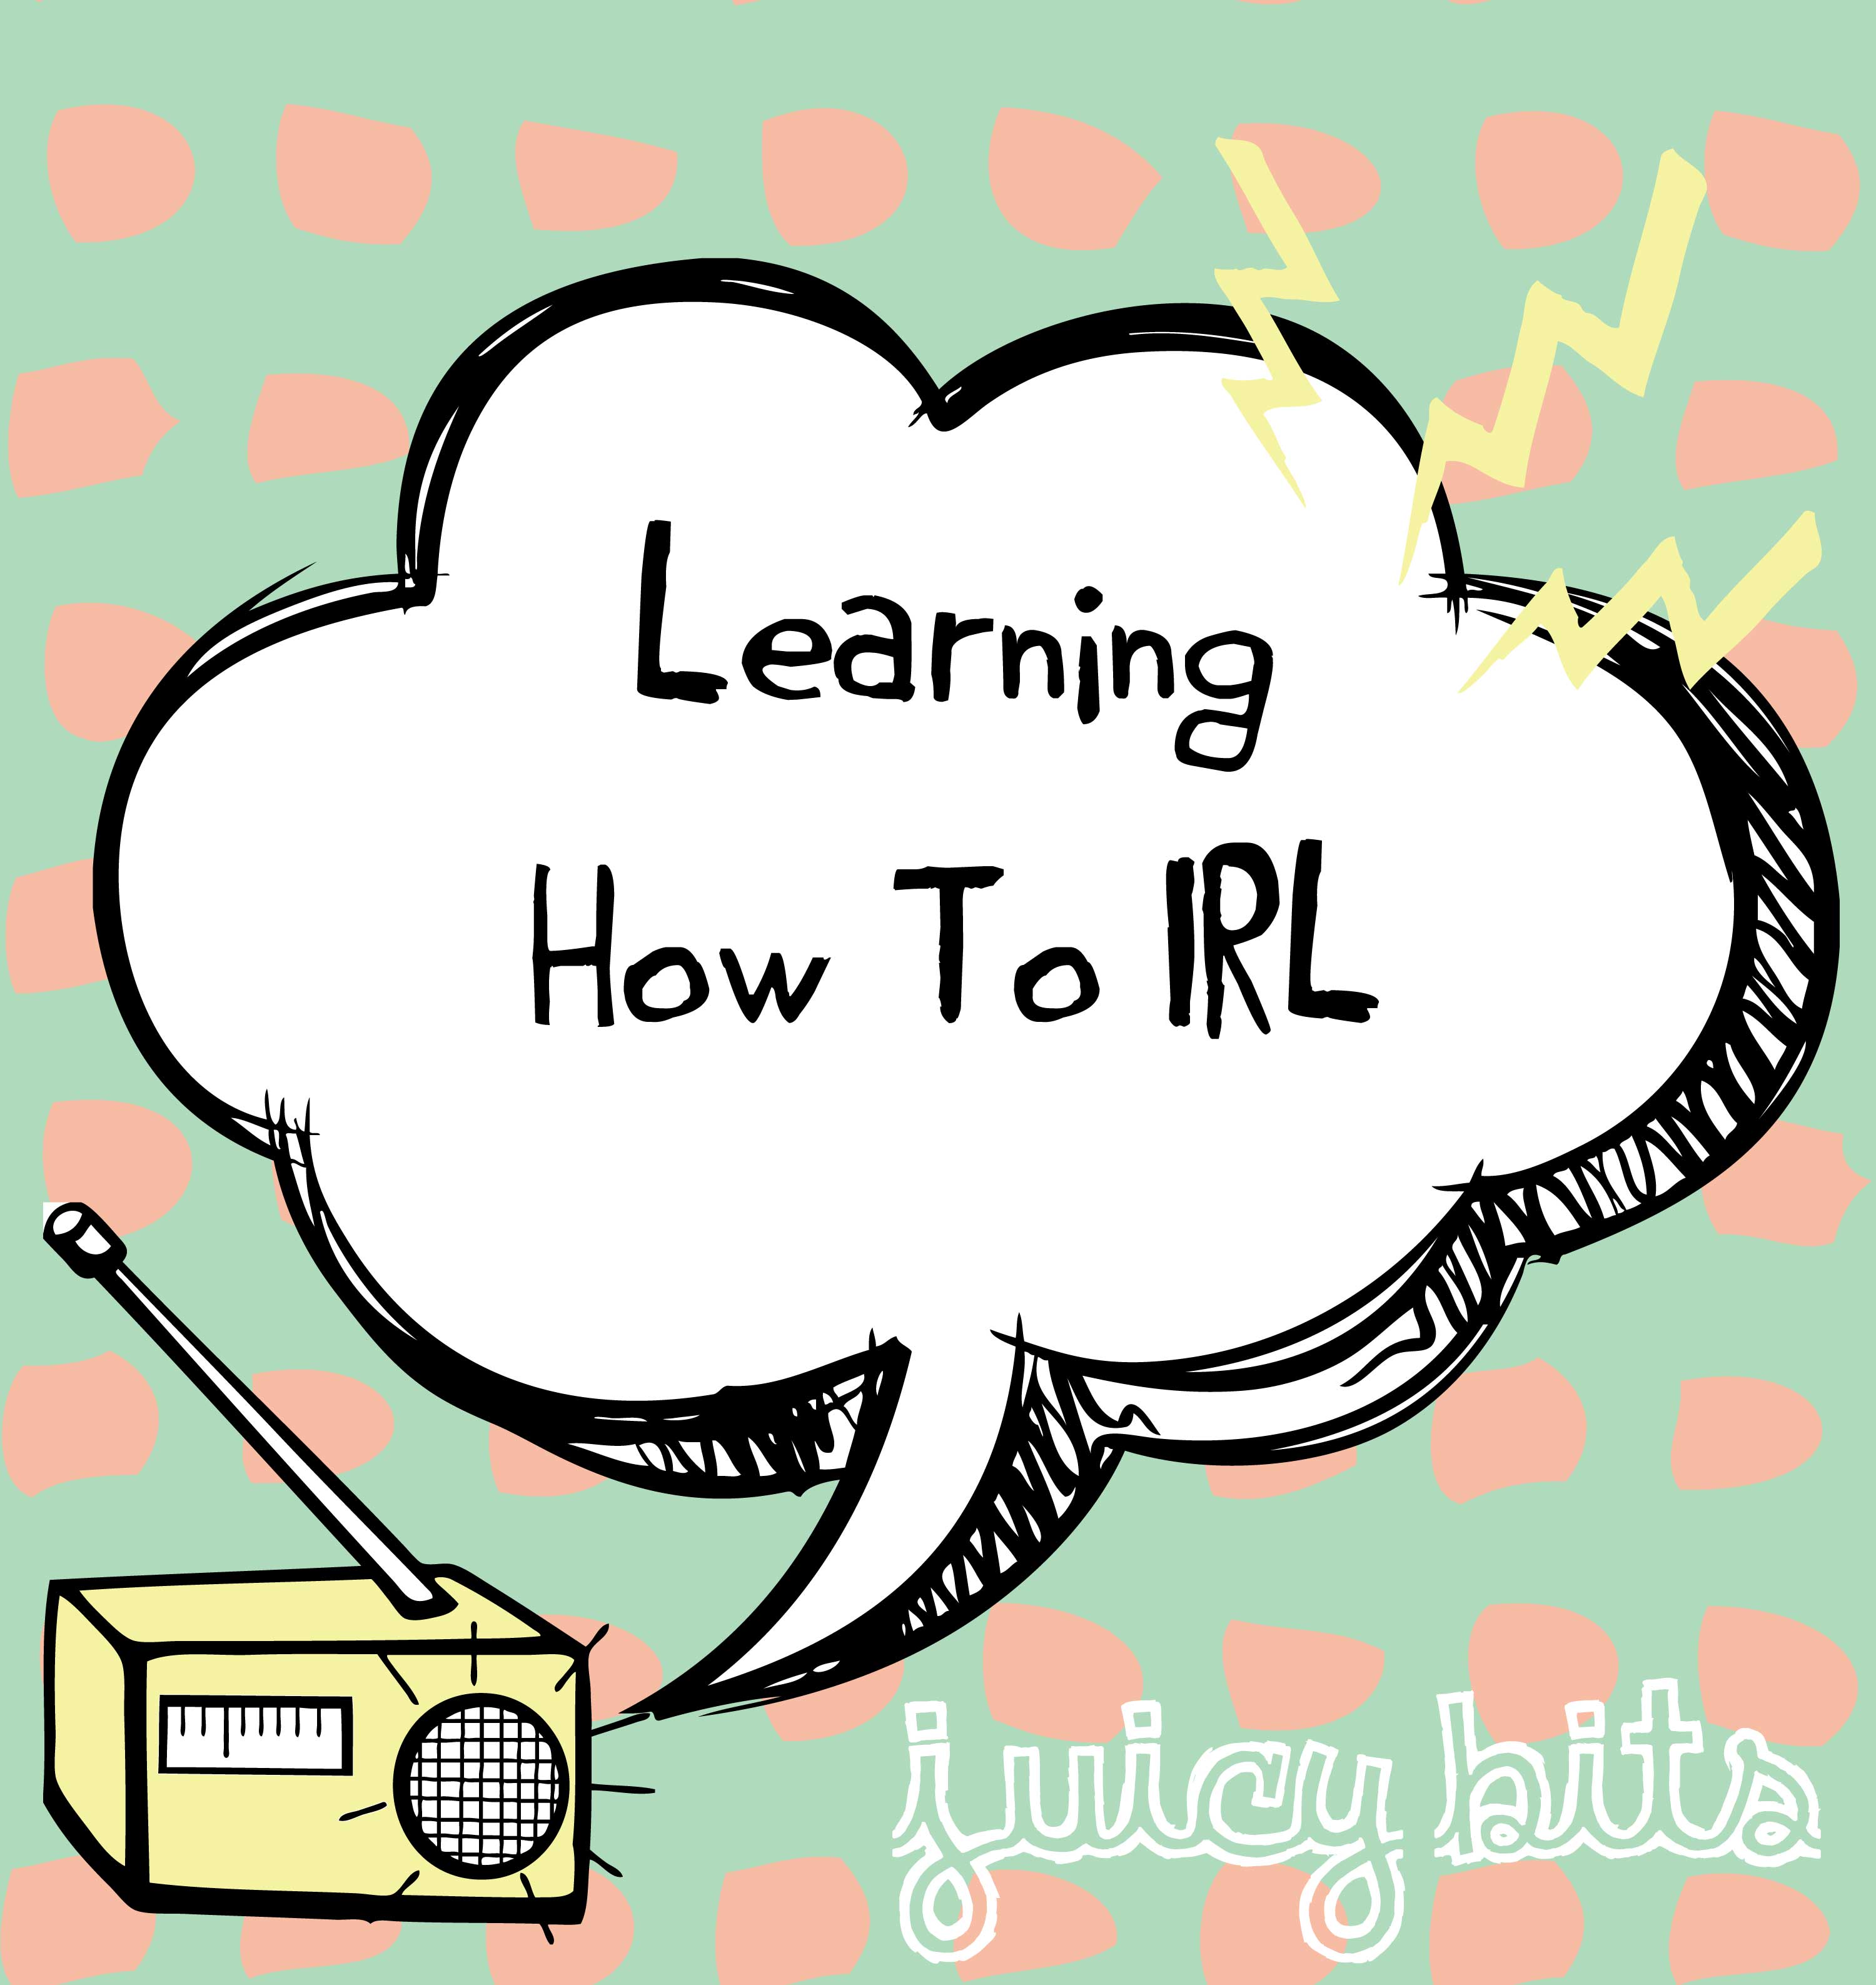 Juicy Bits: Learning How To IRL